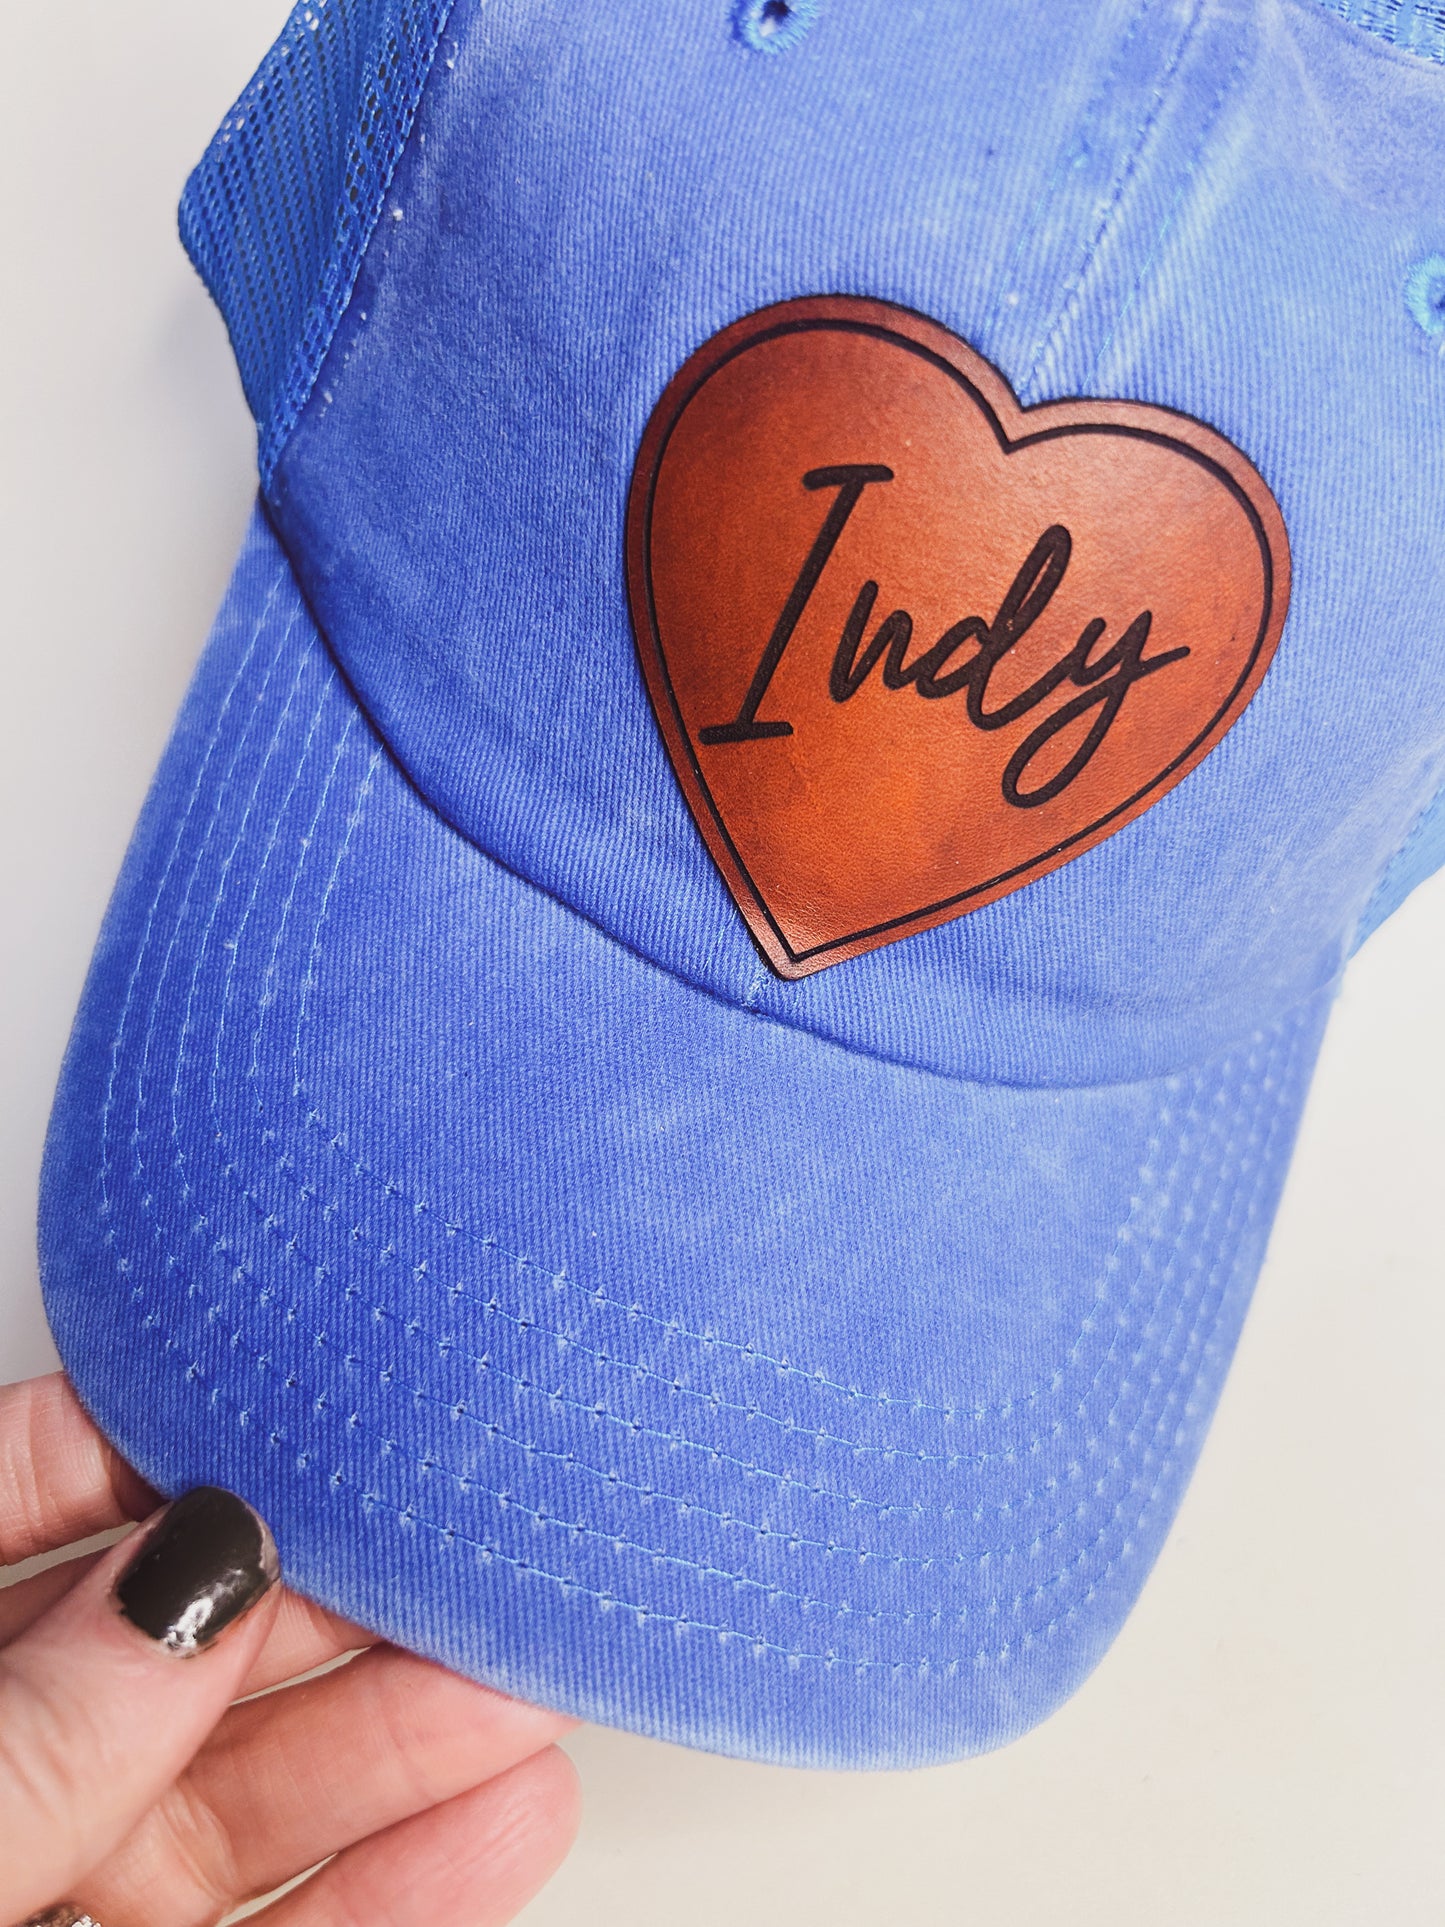 Indy Heart Patch on Blue Baseball Hat